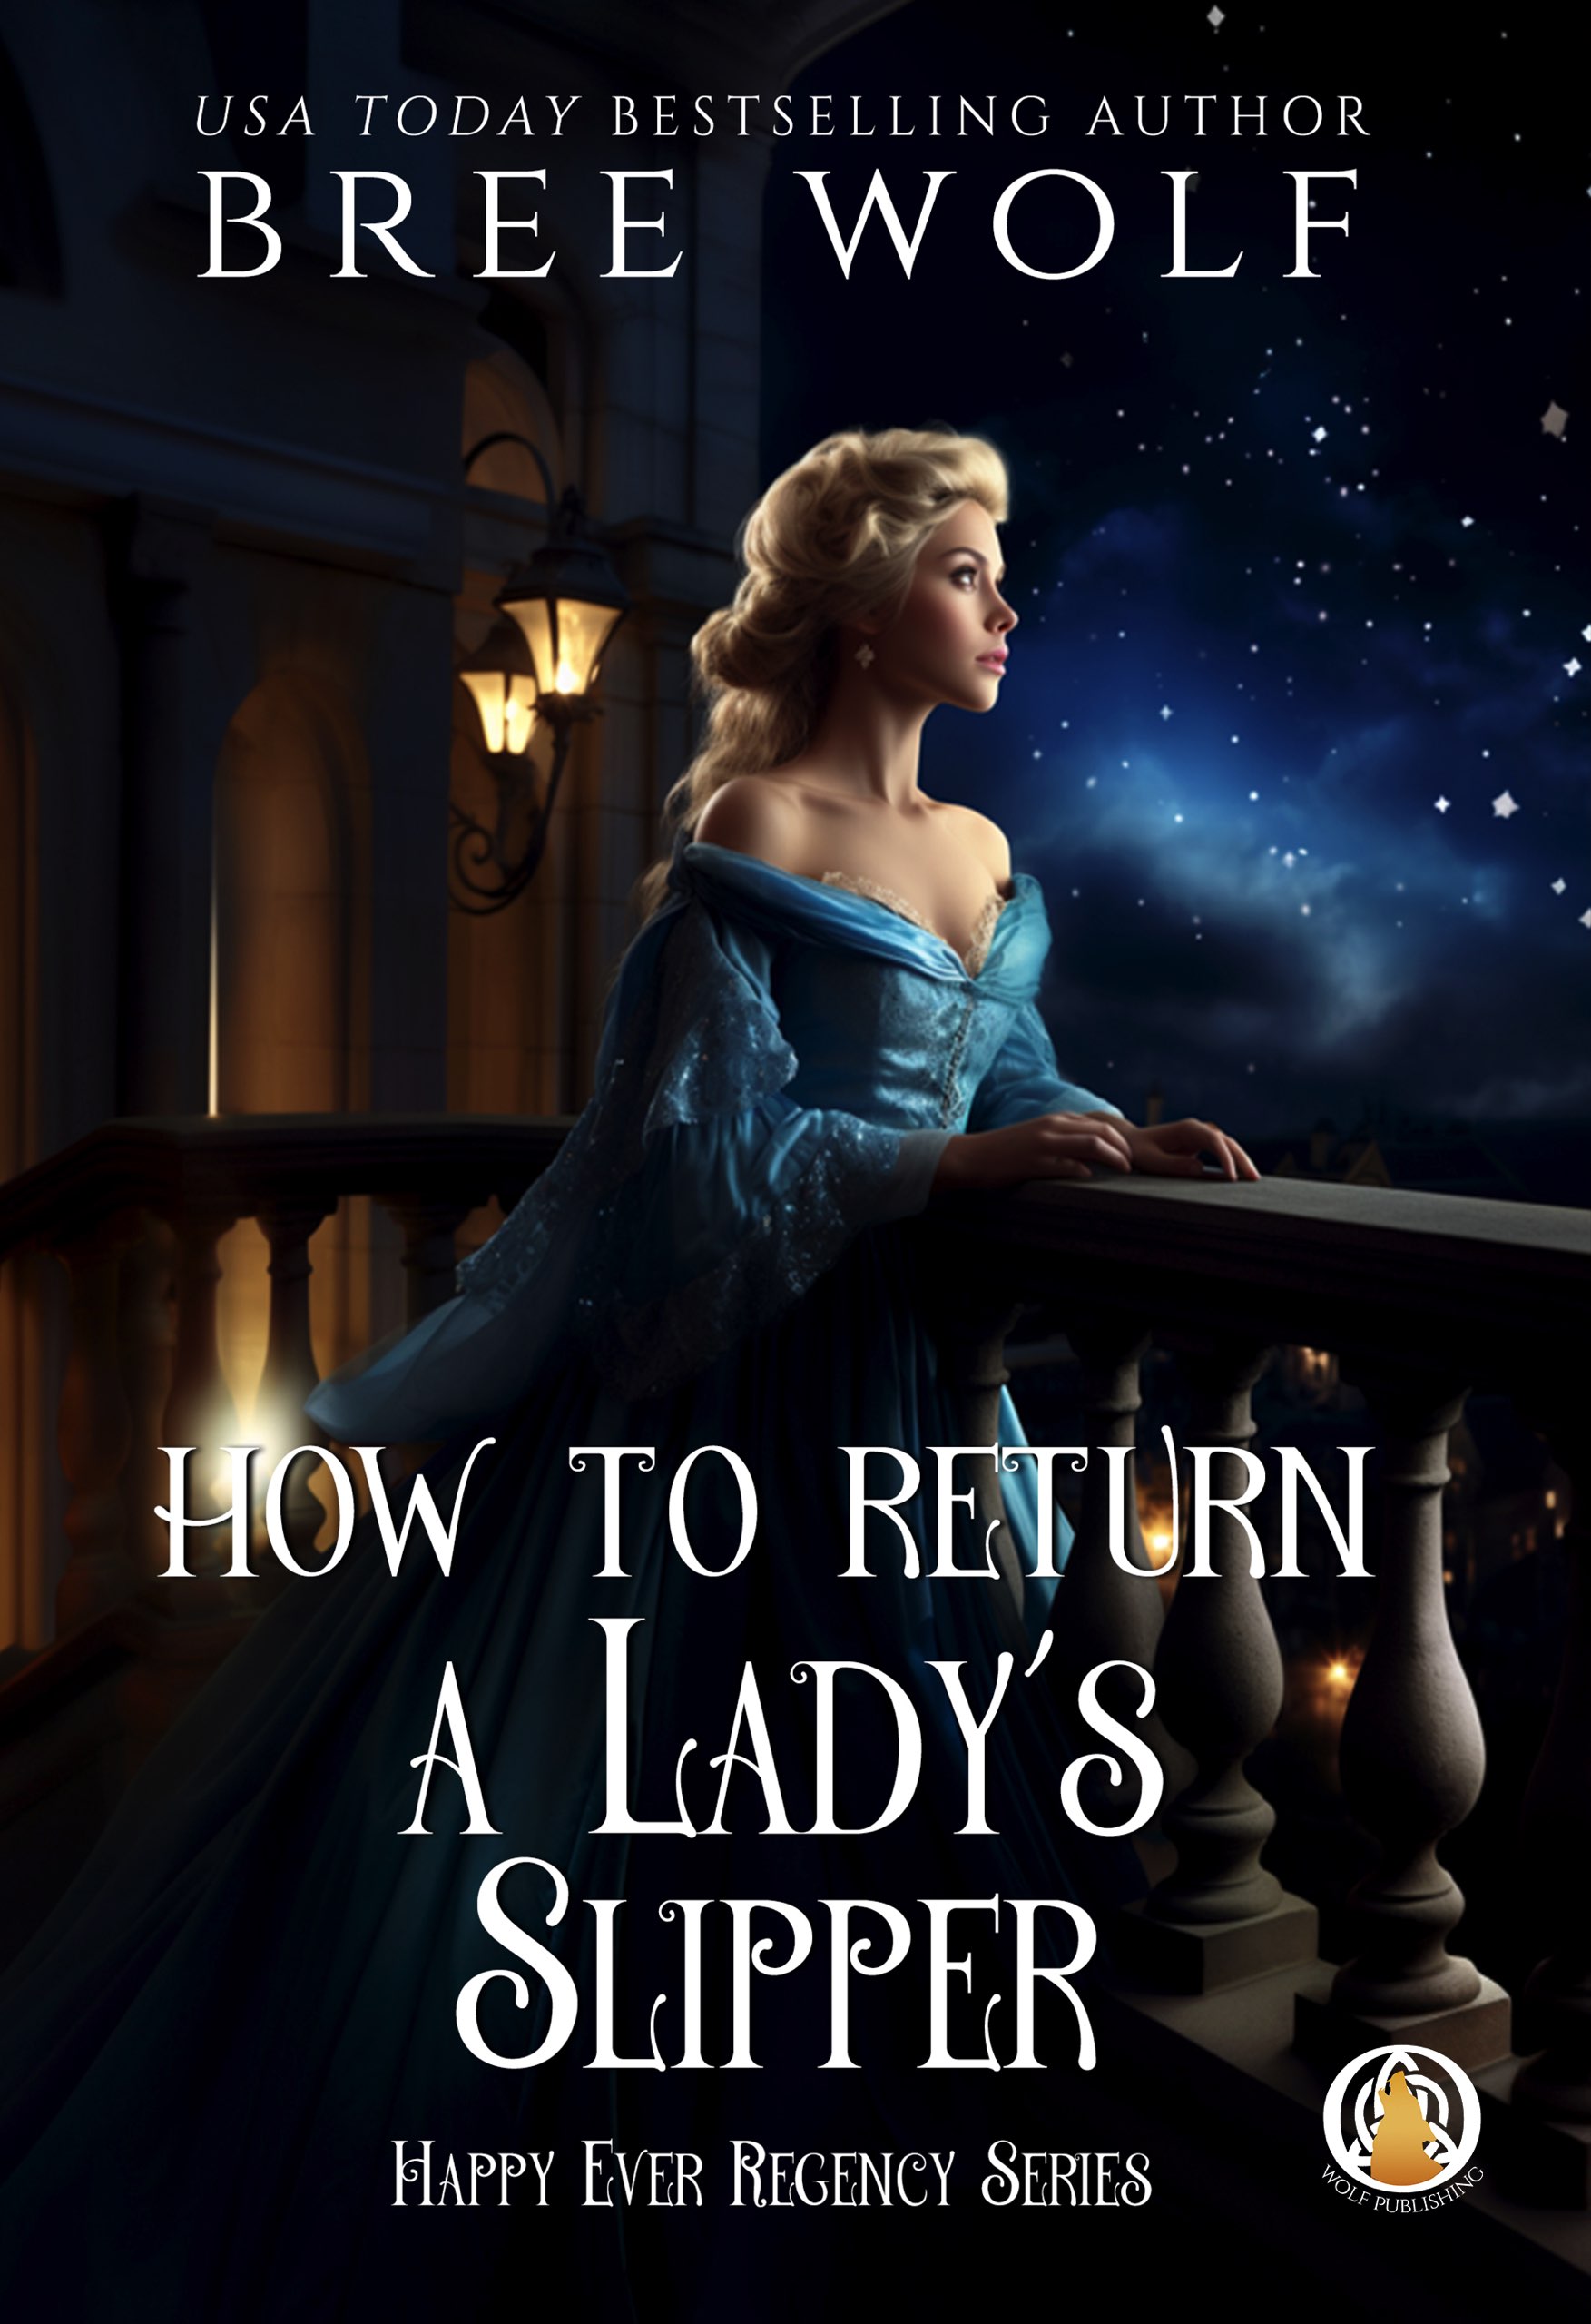 How-to-Return-a-Ladys-Slipper-Generic